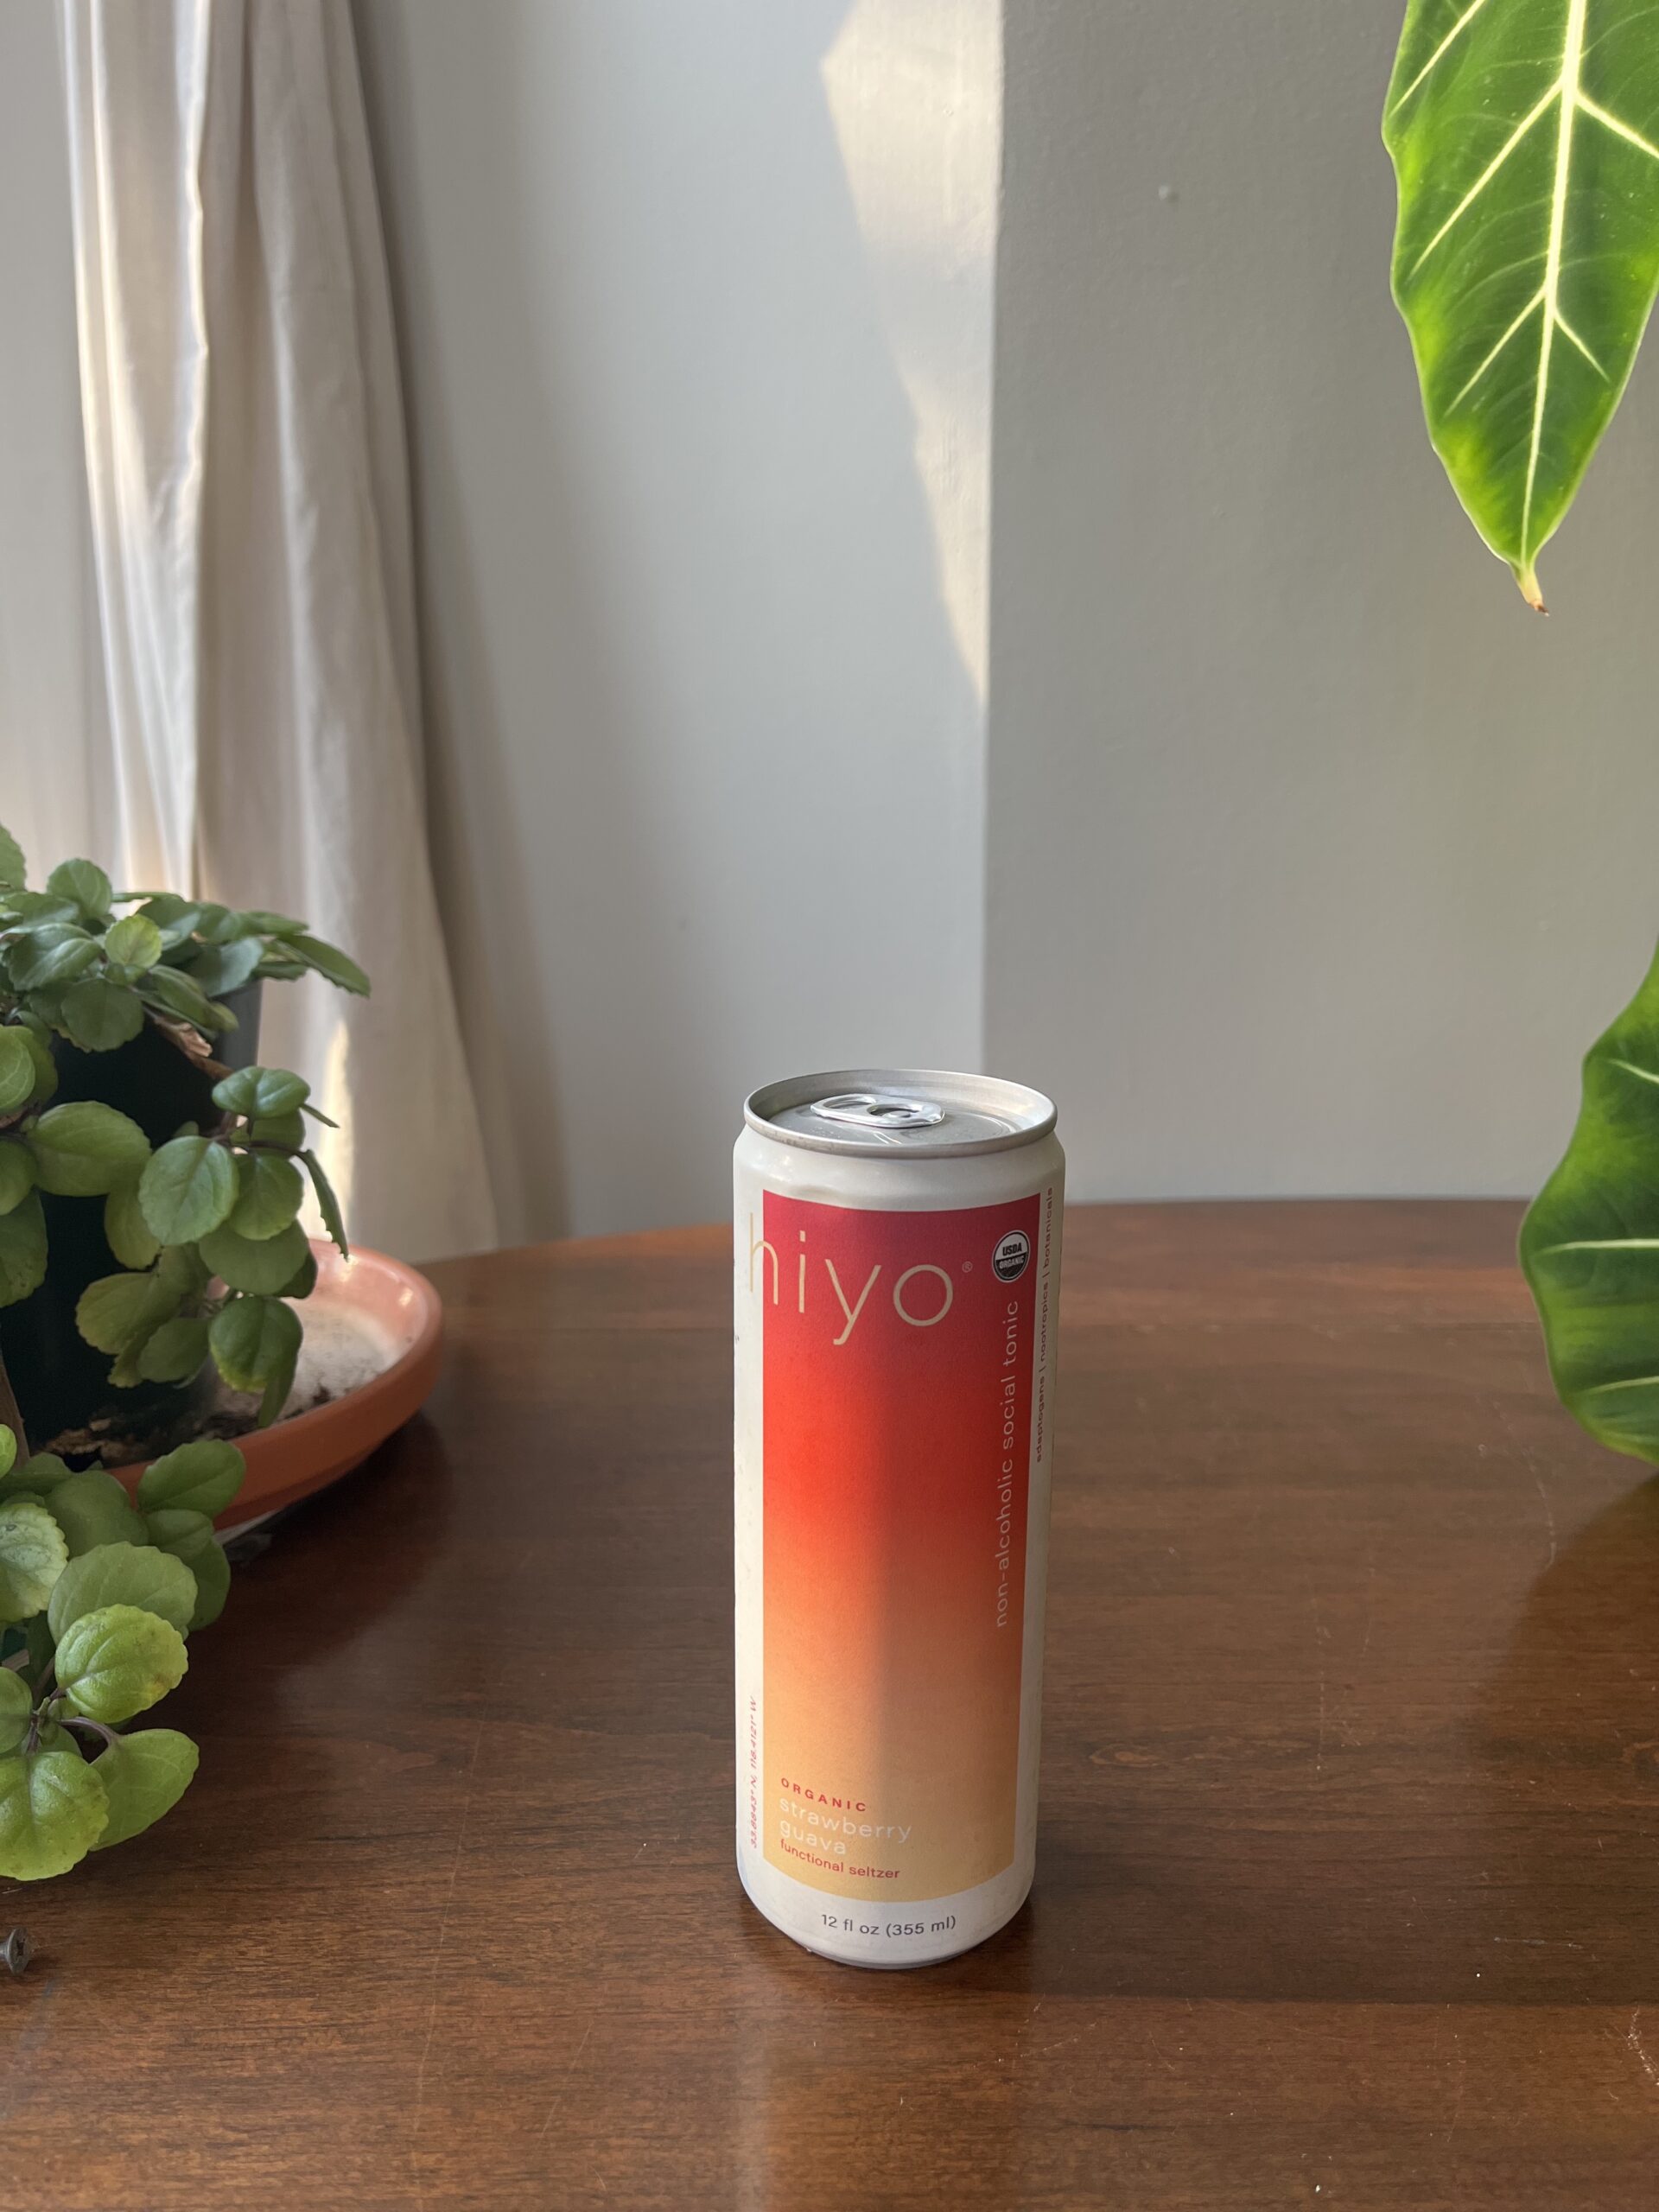 A can of hiyo sparkling social tonic stands on a wooden surface, flanked by green plants in the background.